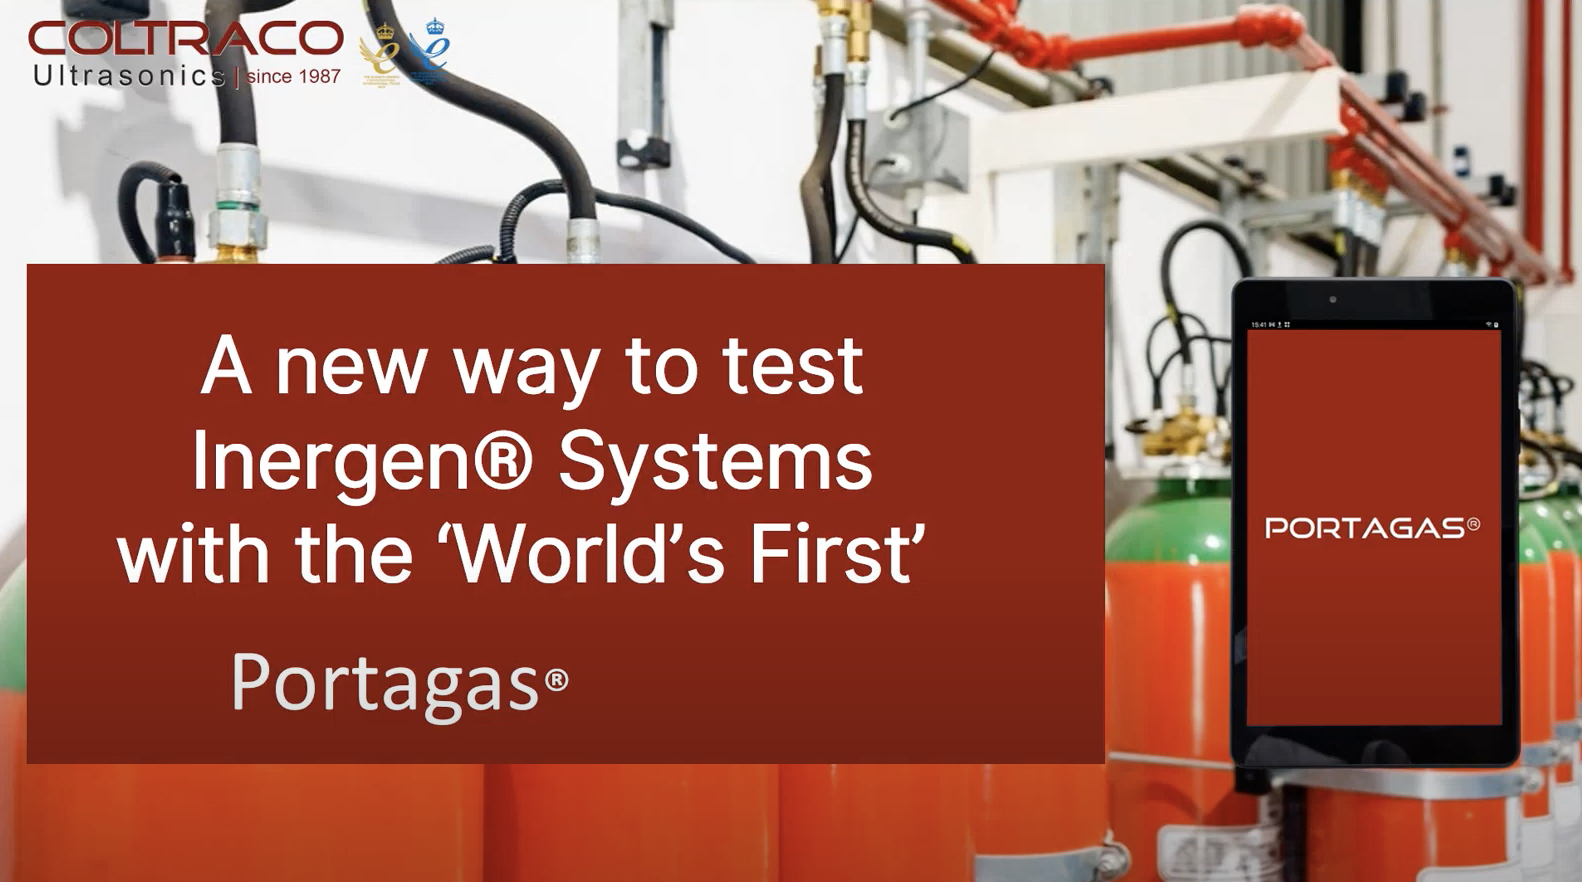 Webinar - “A new way to test Inergen® Systems with the 'World's First' Portagas®"